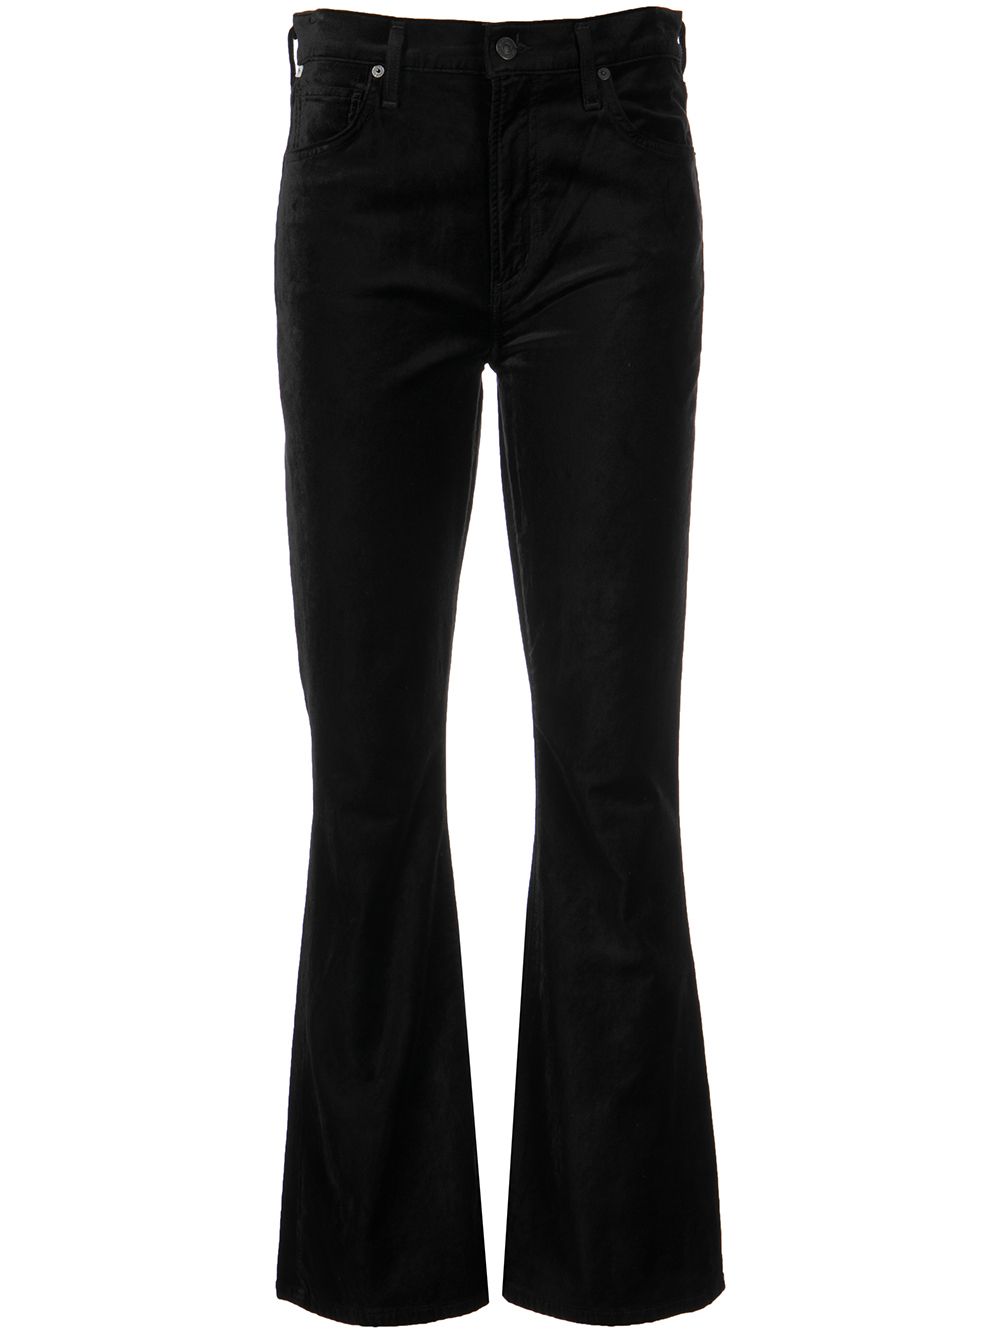 Citizens of Humanity Lilah flared bootcut trousers - Black von Citizens of Humanity